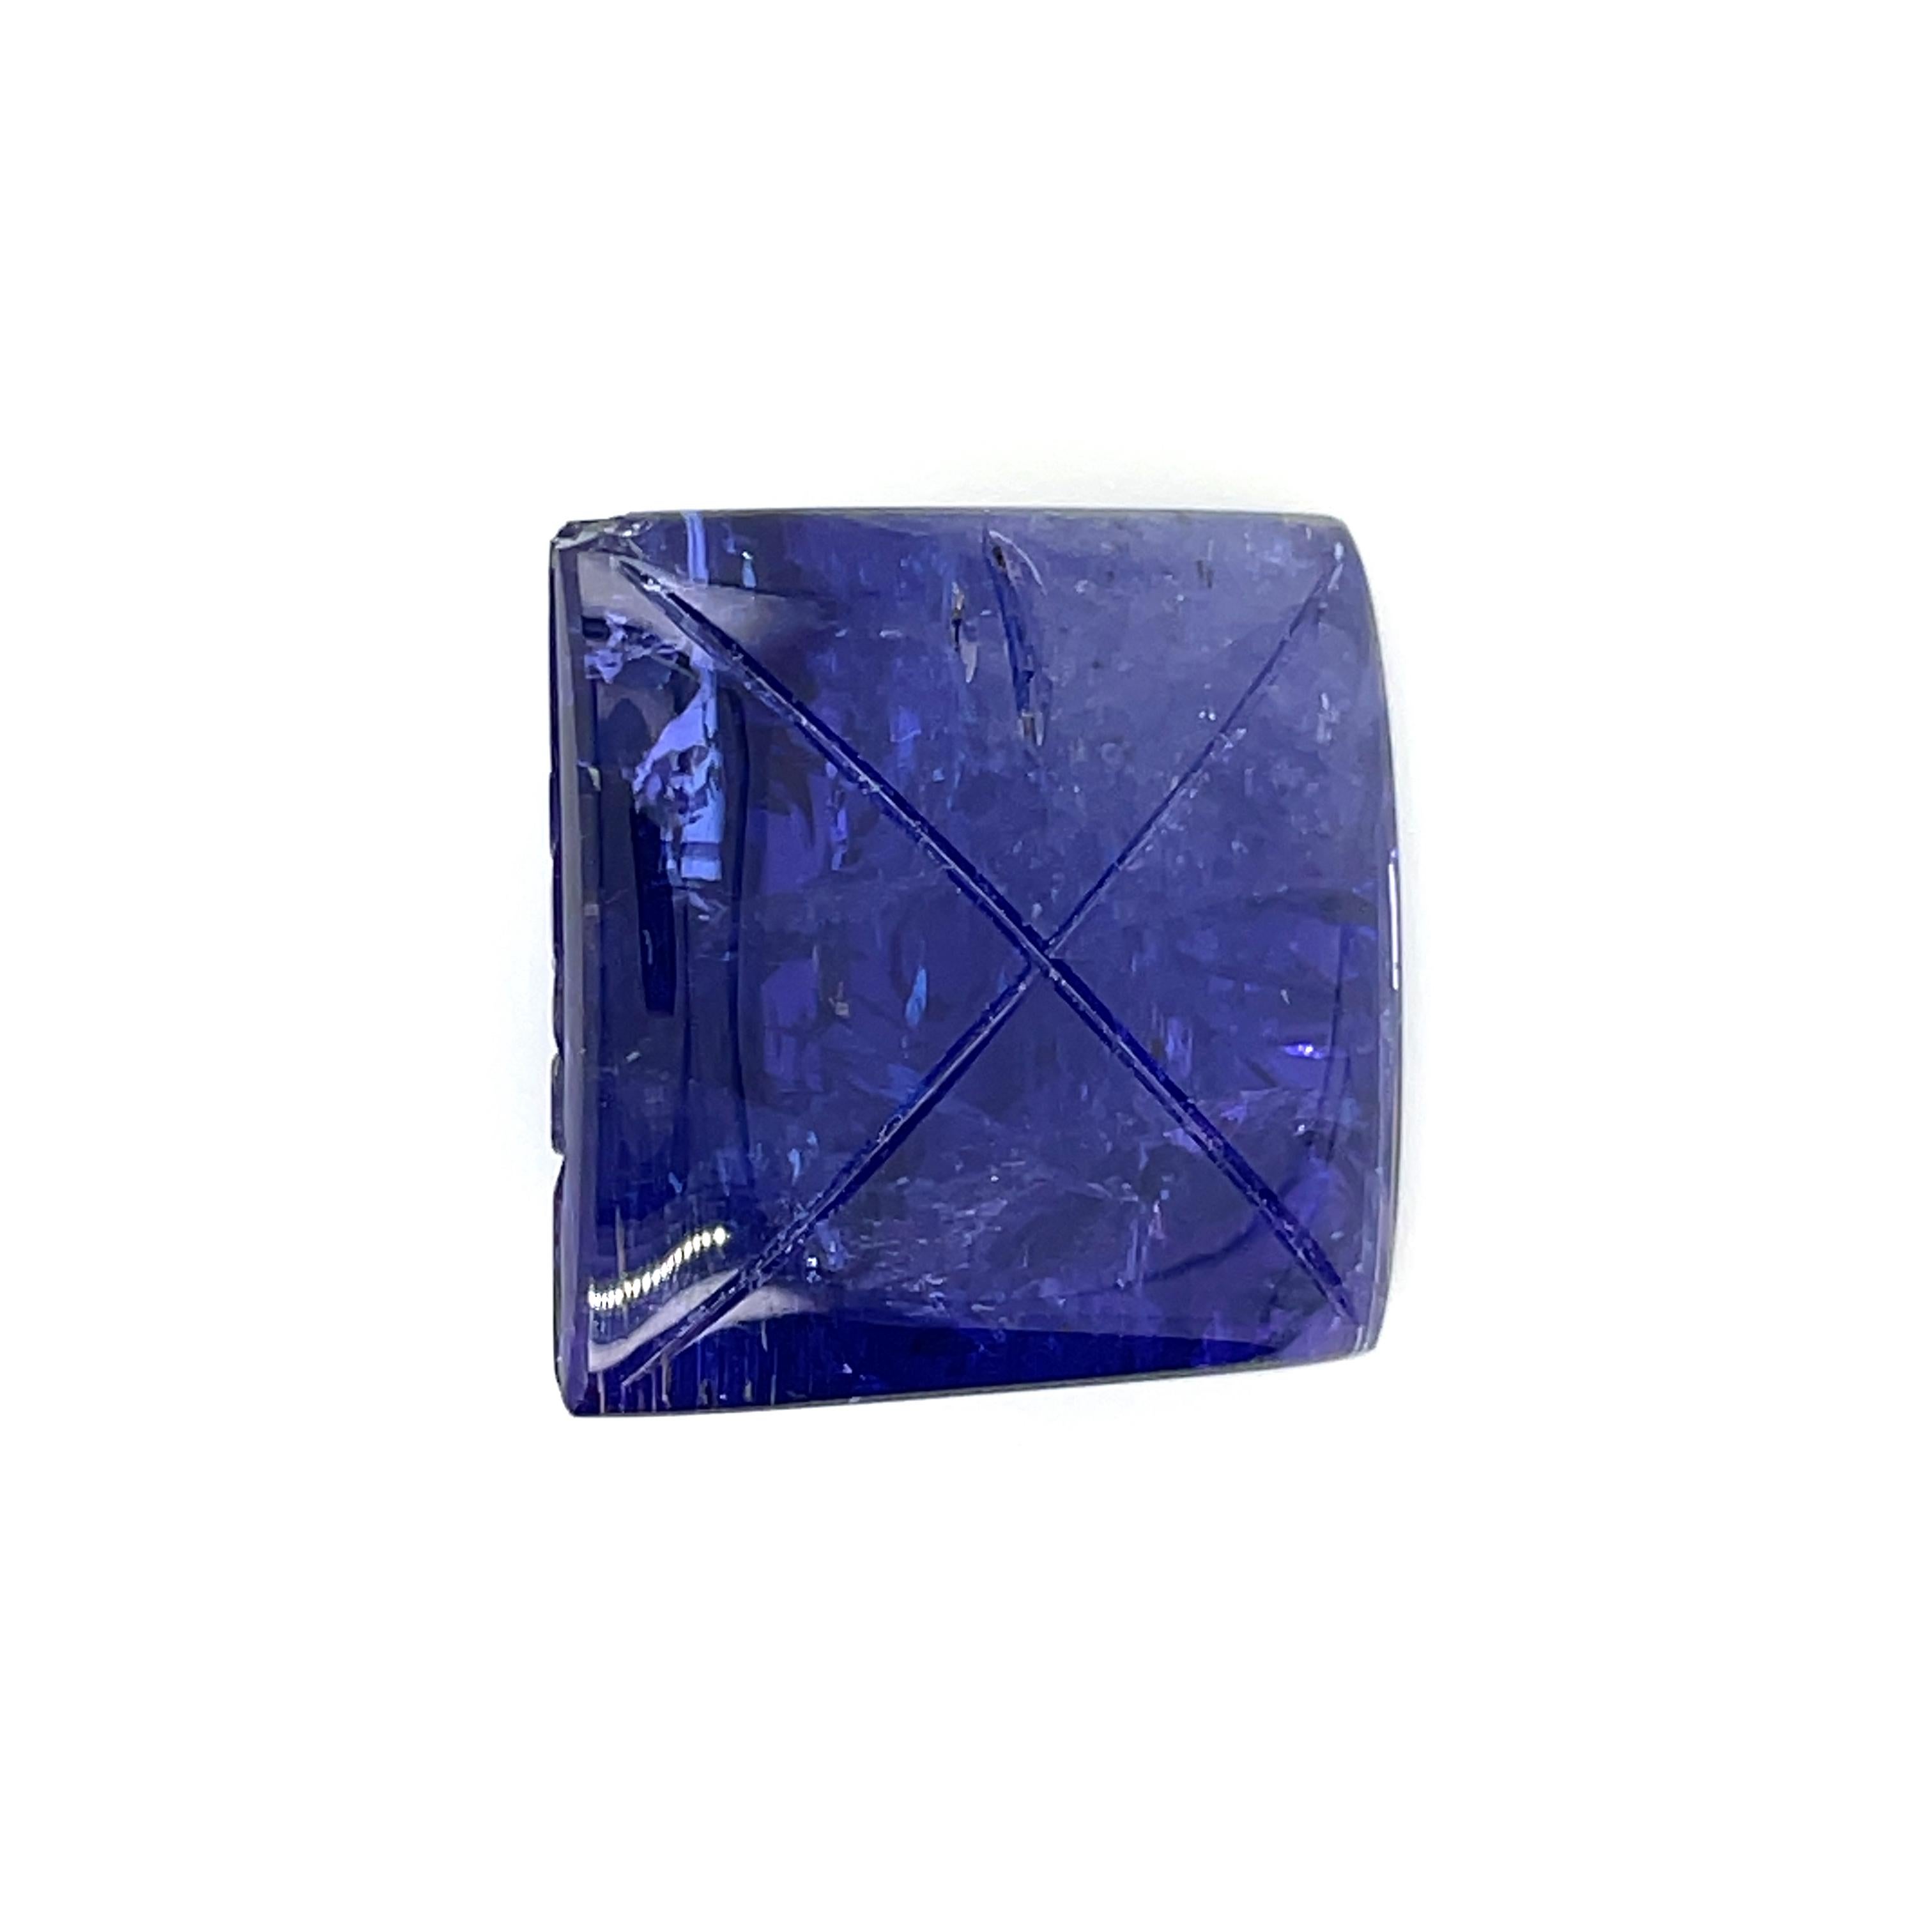 Square Cut Carved Eye Tanzanite Cts 79.71 For Sale